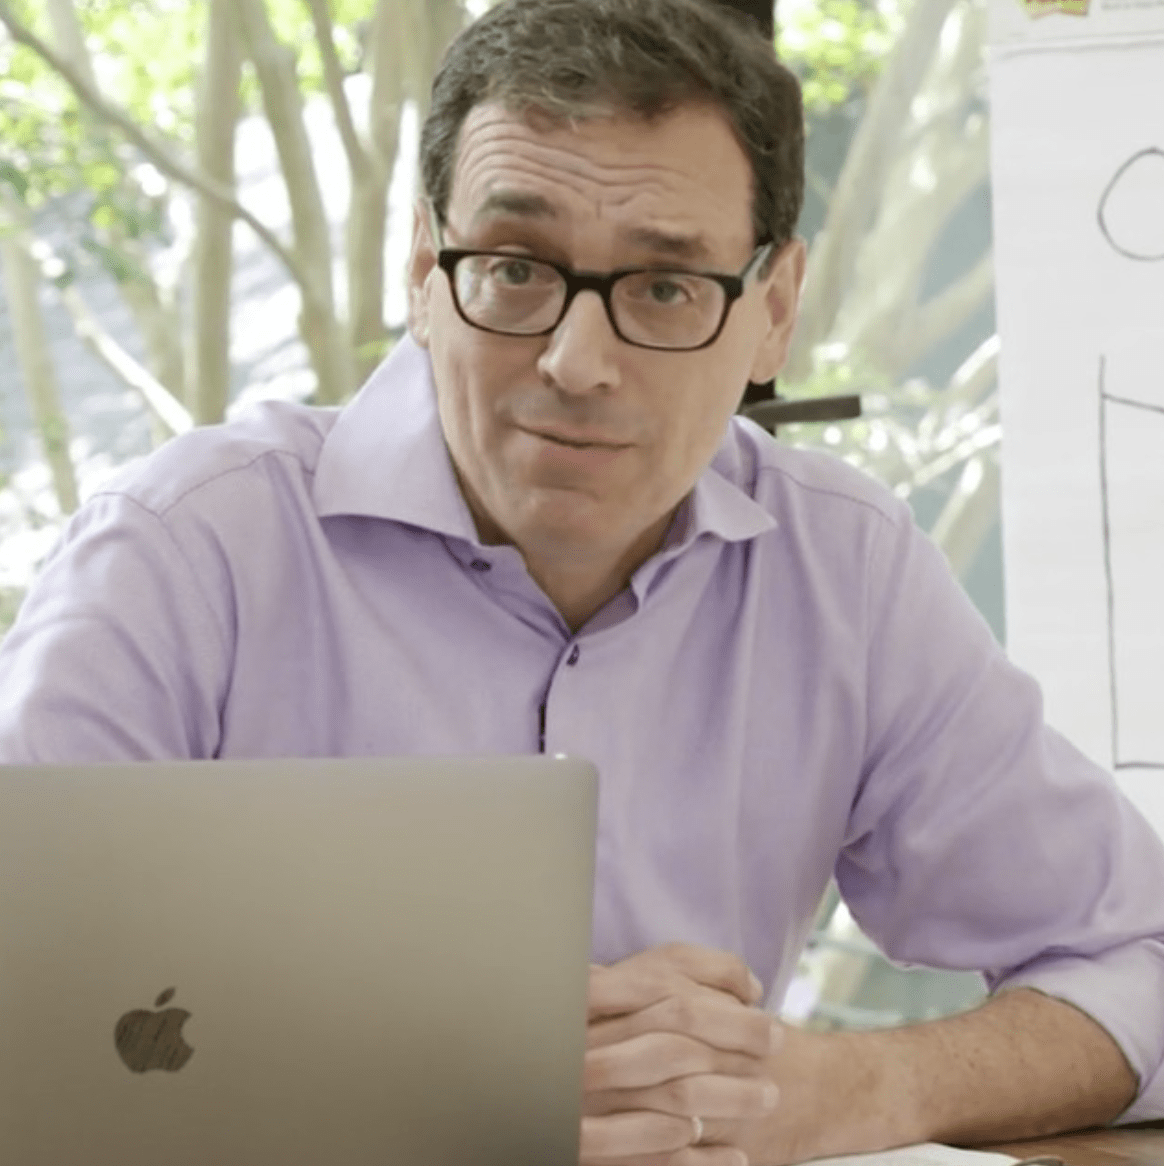 Who is daniel pink